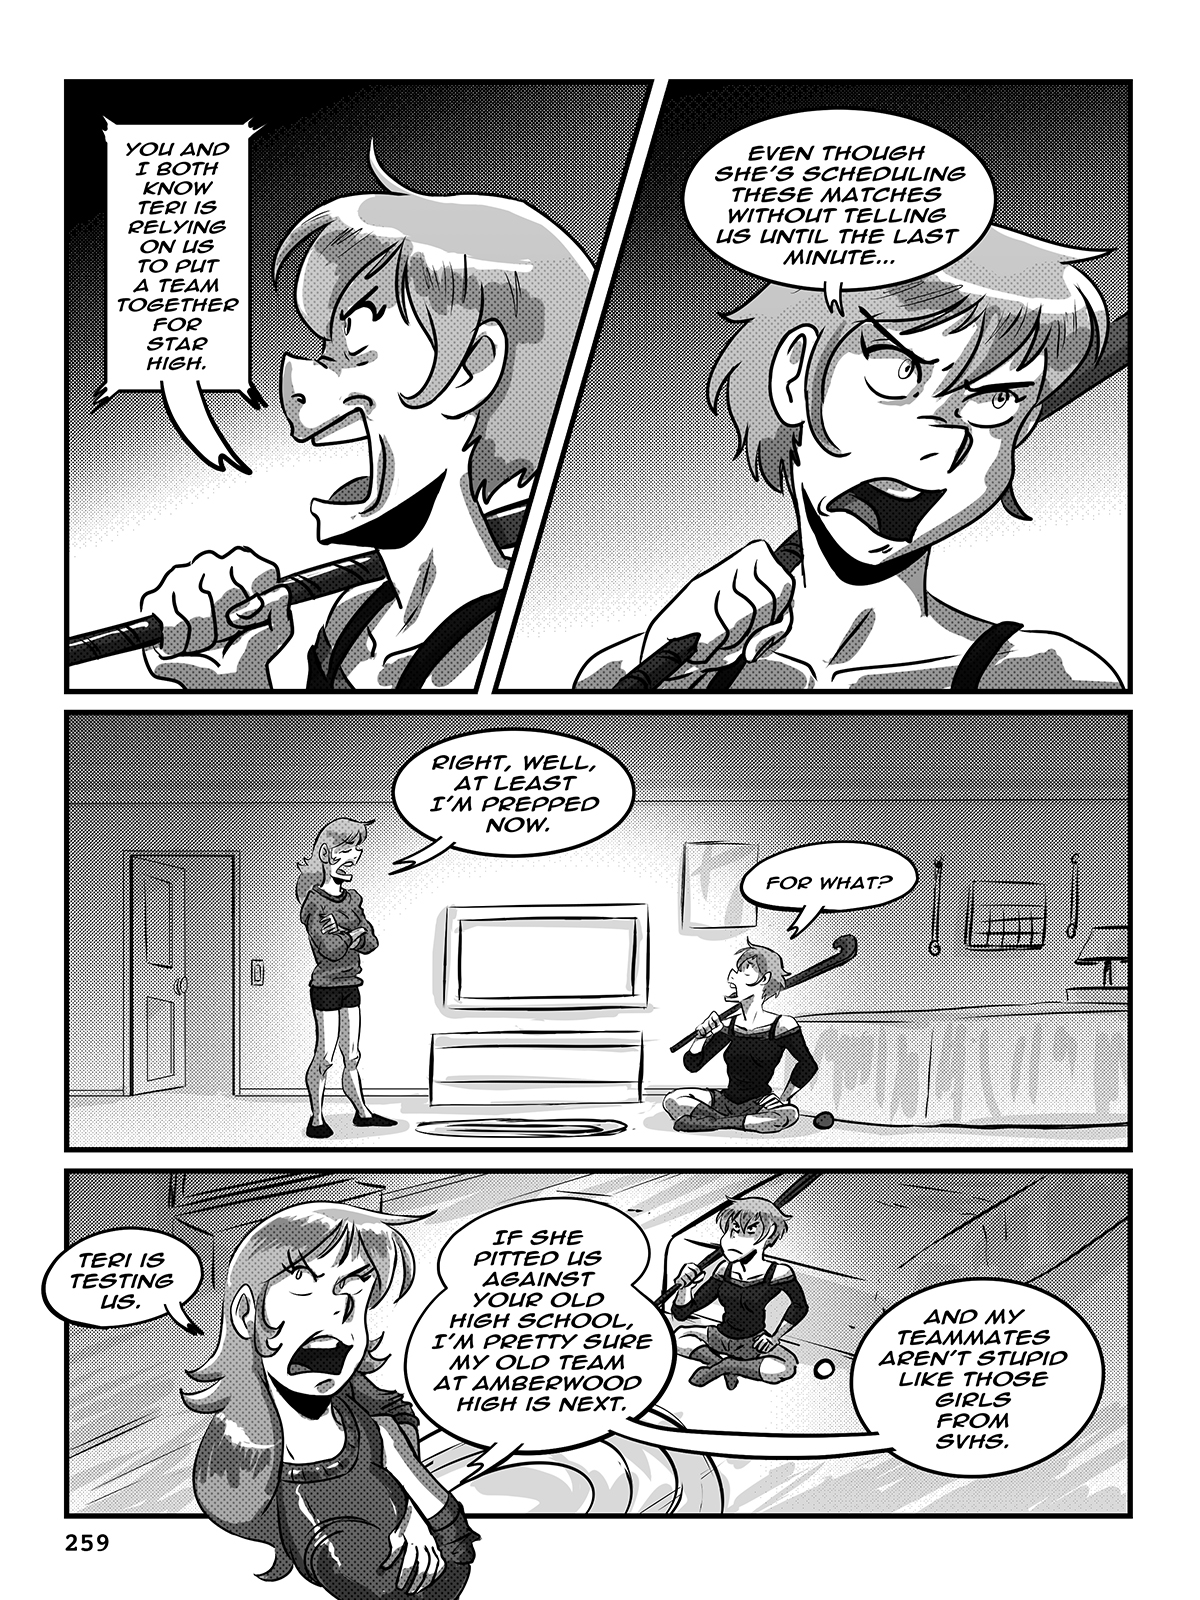 Hockey, Love, & GUTS! – Chapter 9 – Page 259